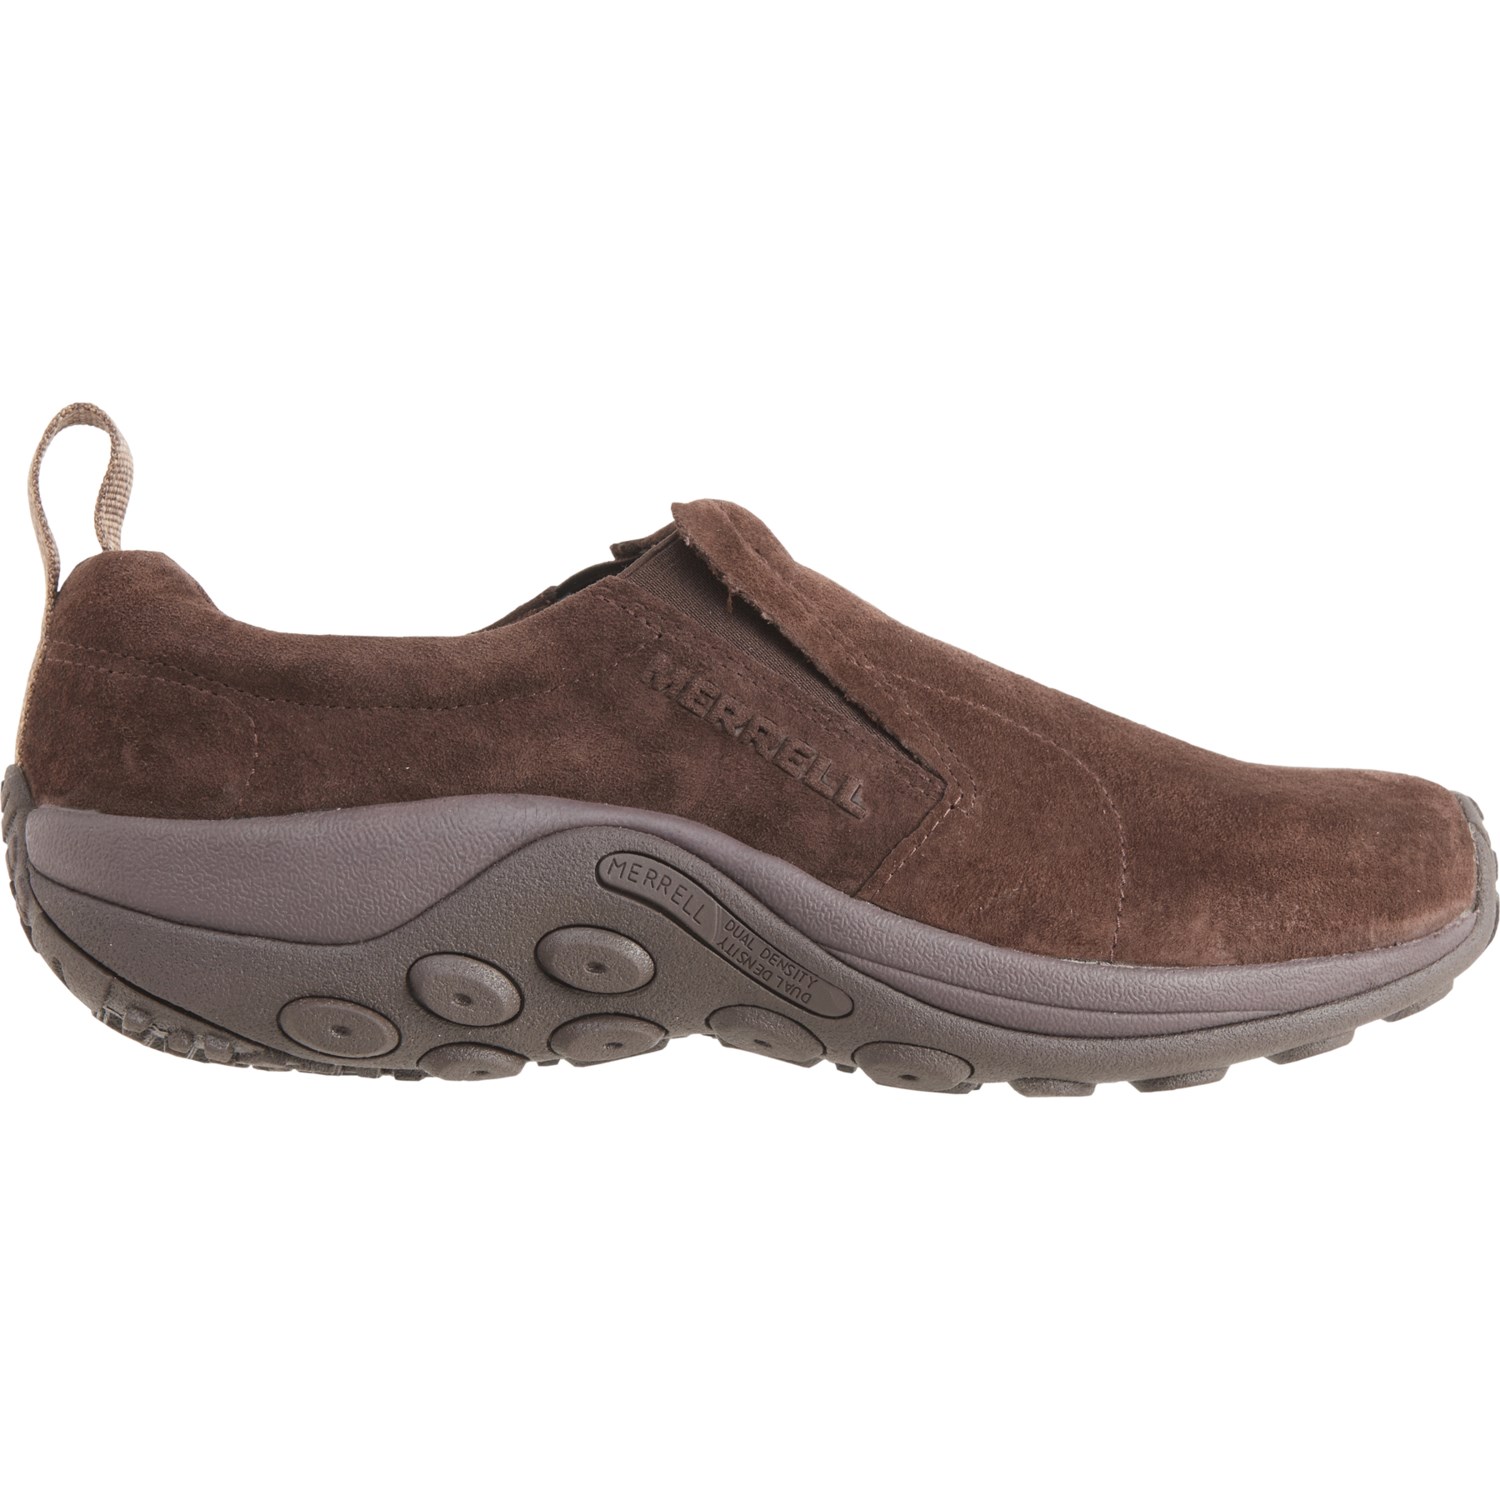 Merrell Jungle Moc Rinse Shoes (For Men) - Save 63%